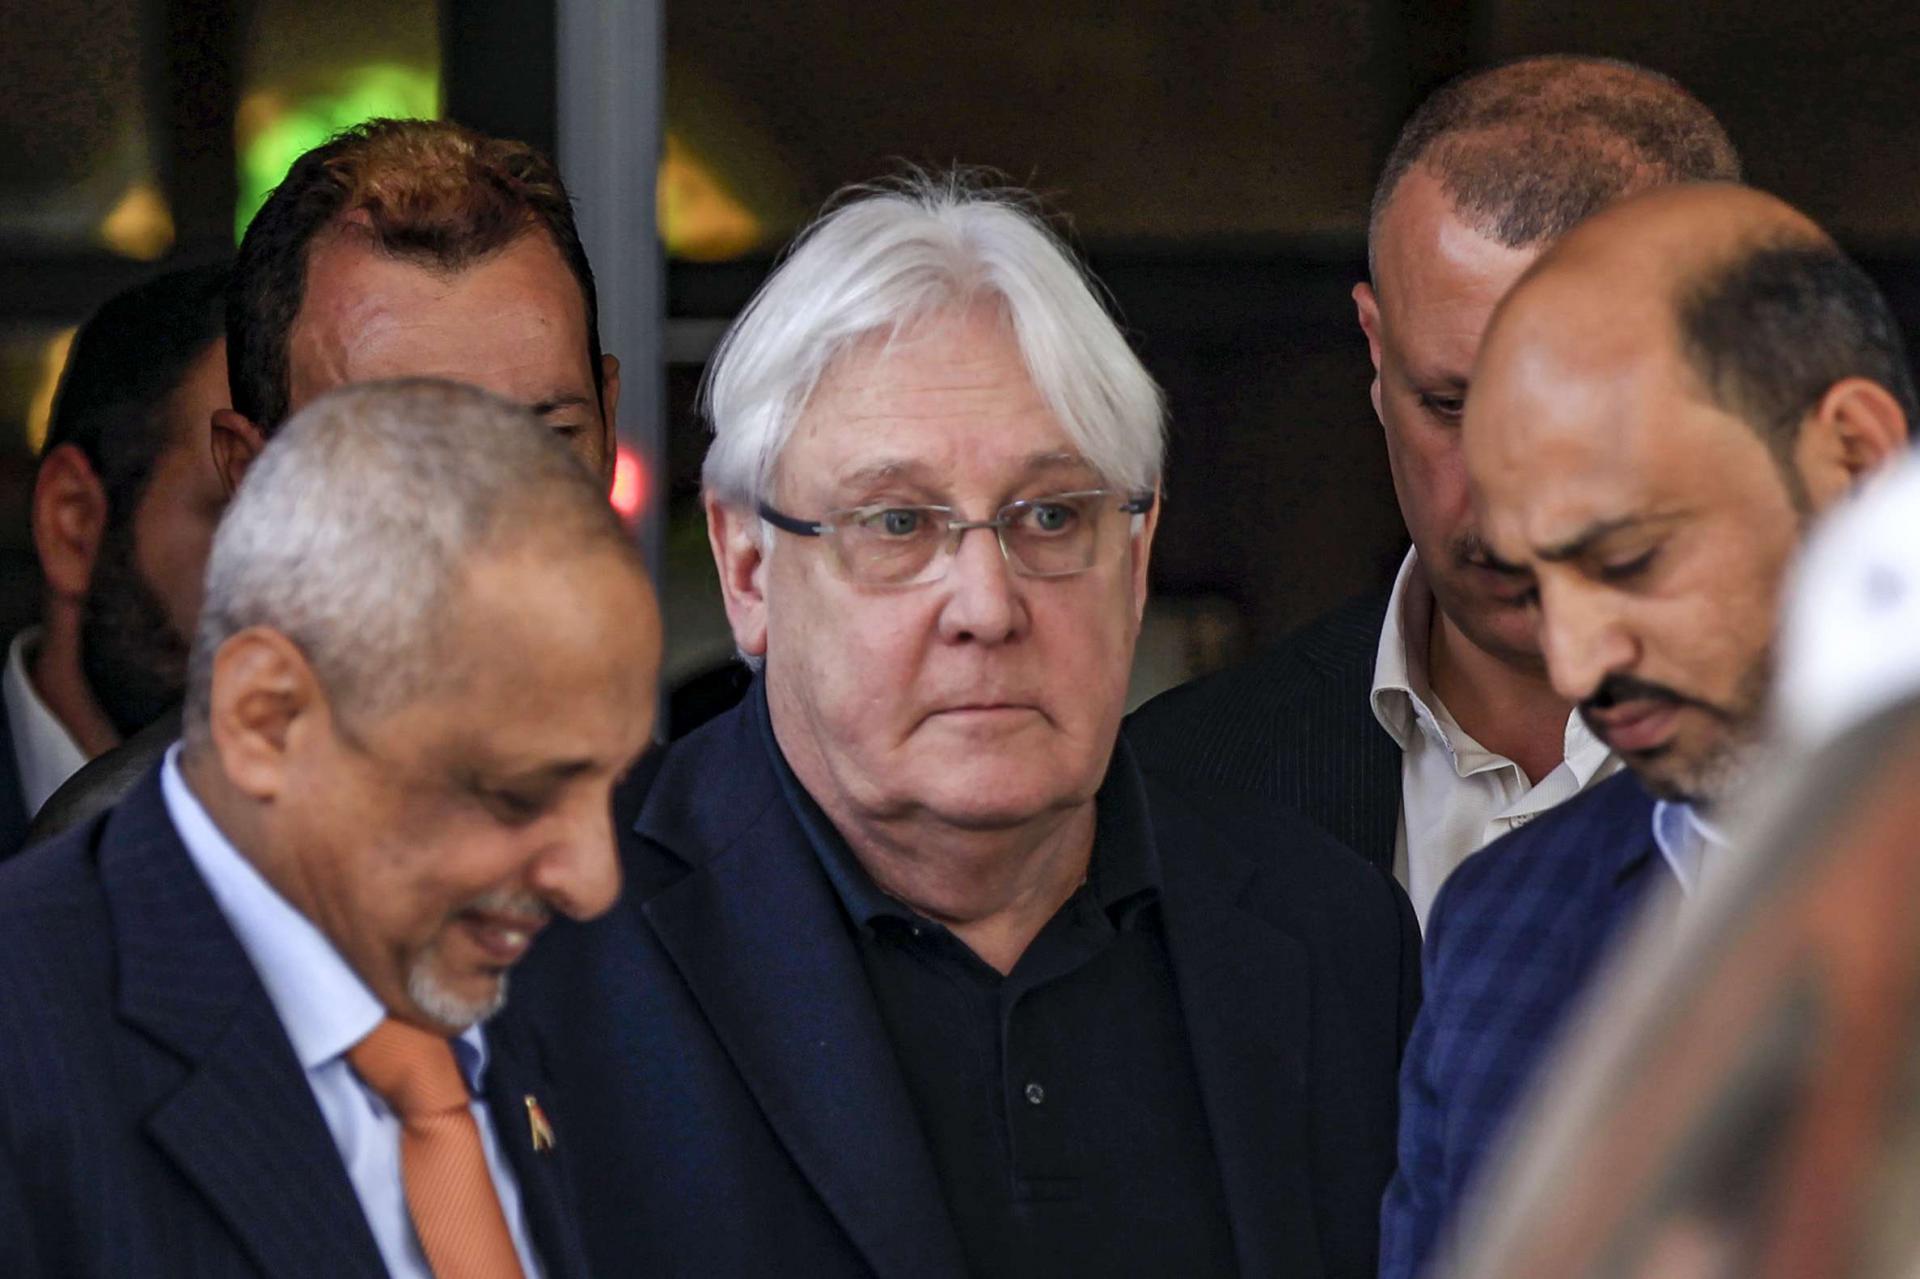 Martin Griffiths (C) the UN special envoy for Yemen